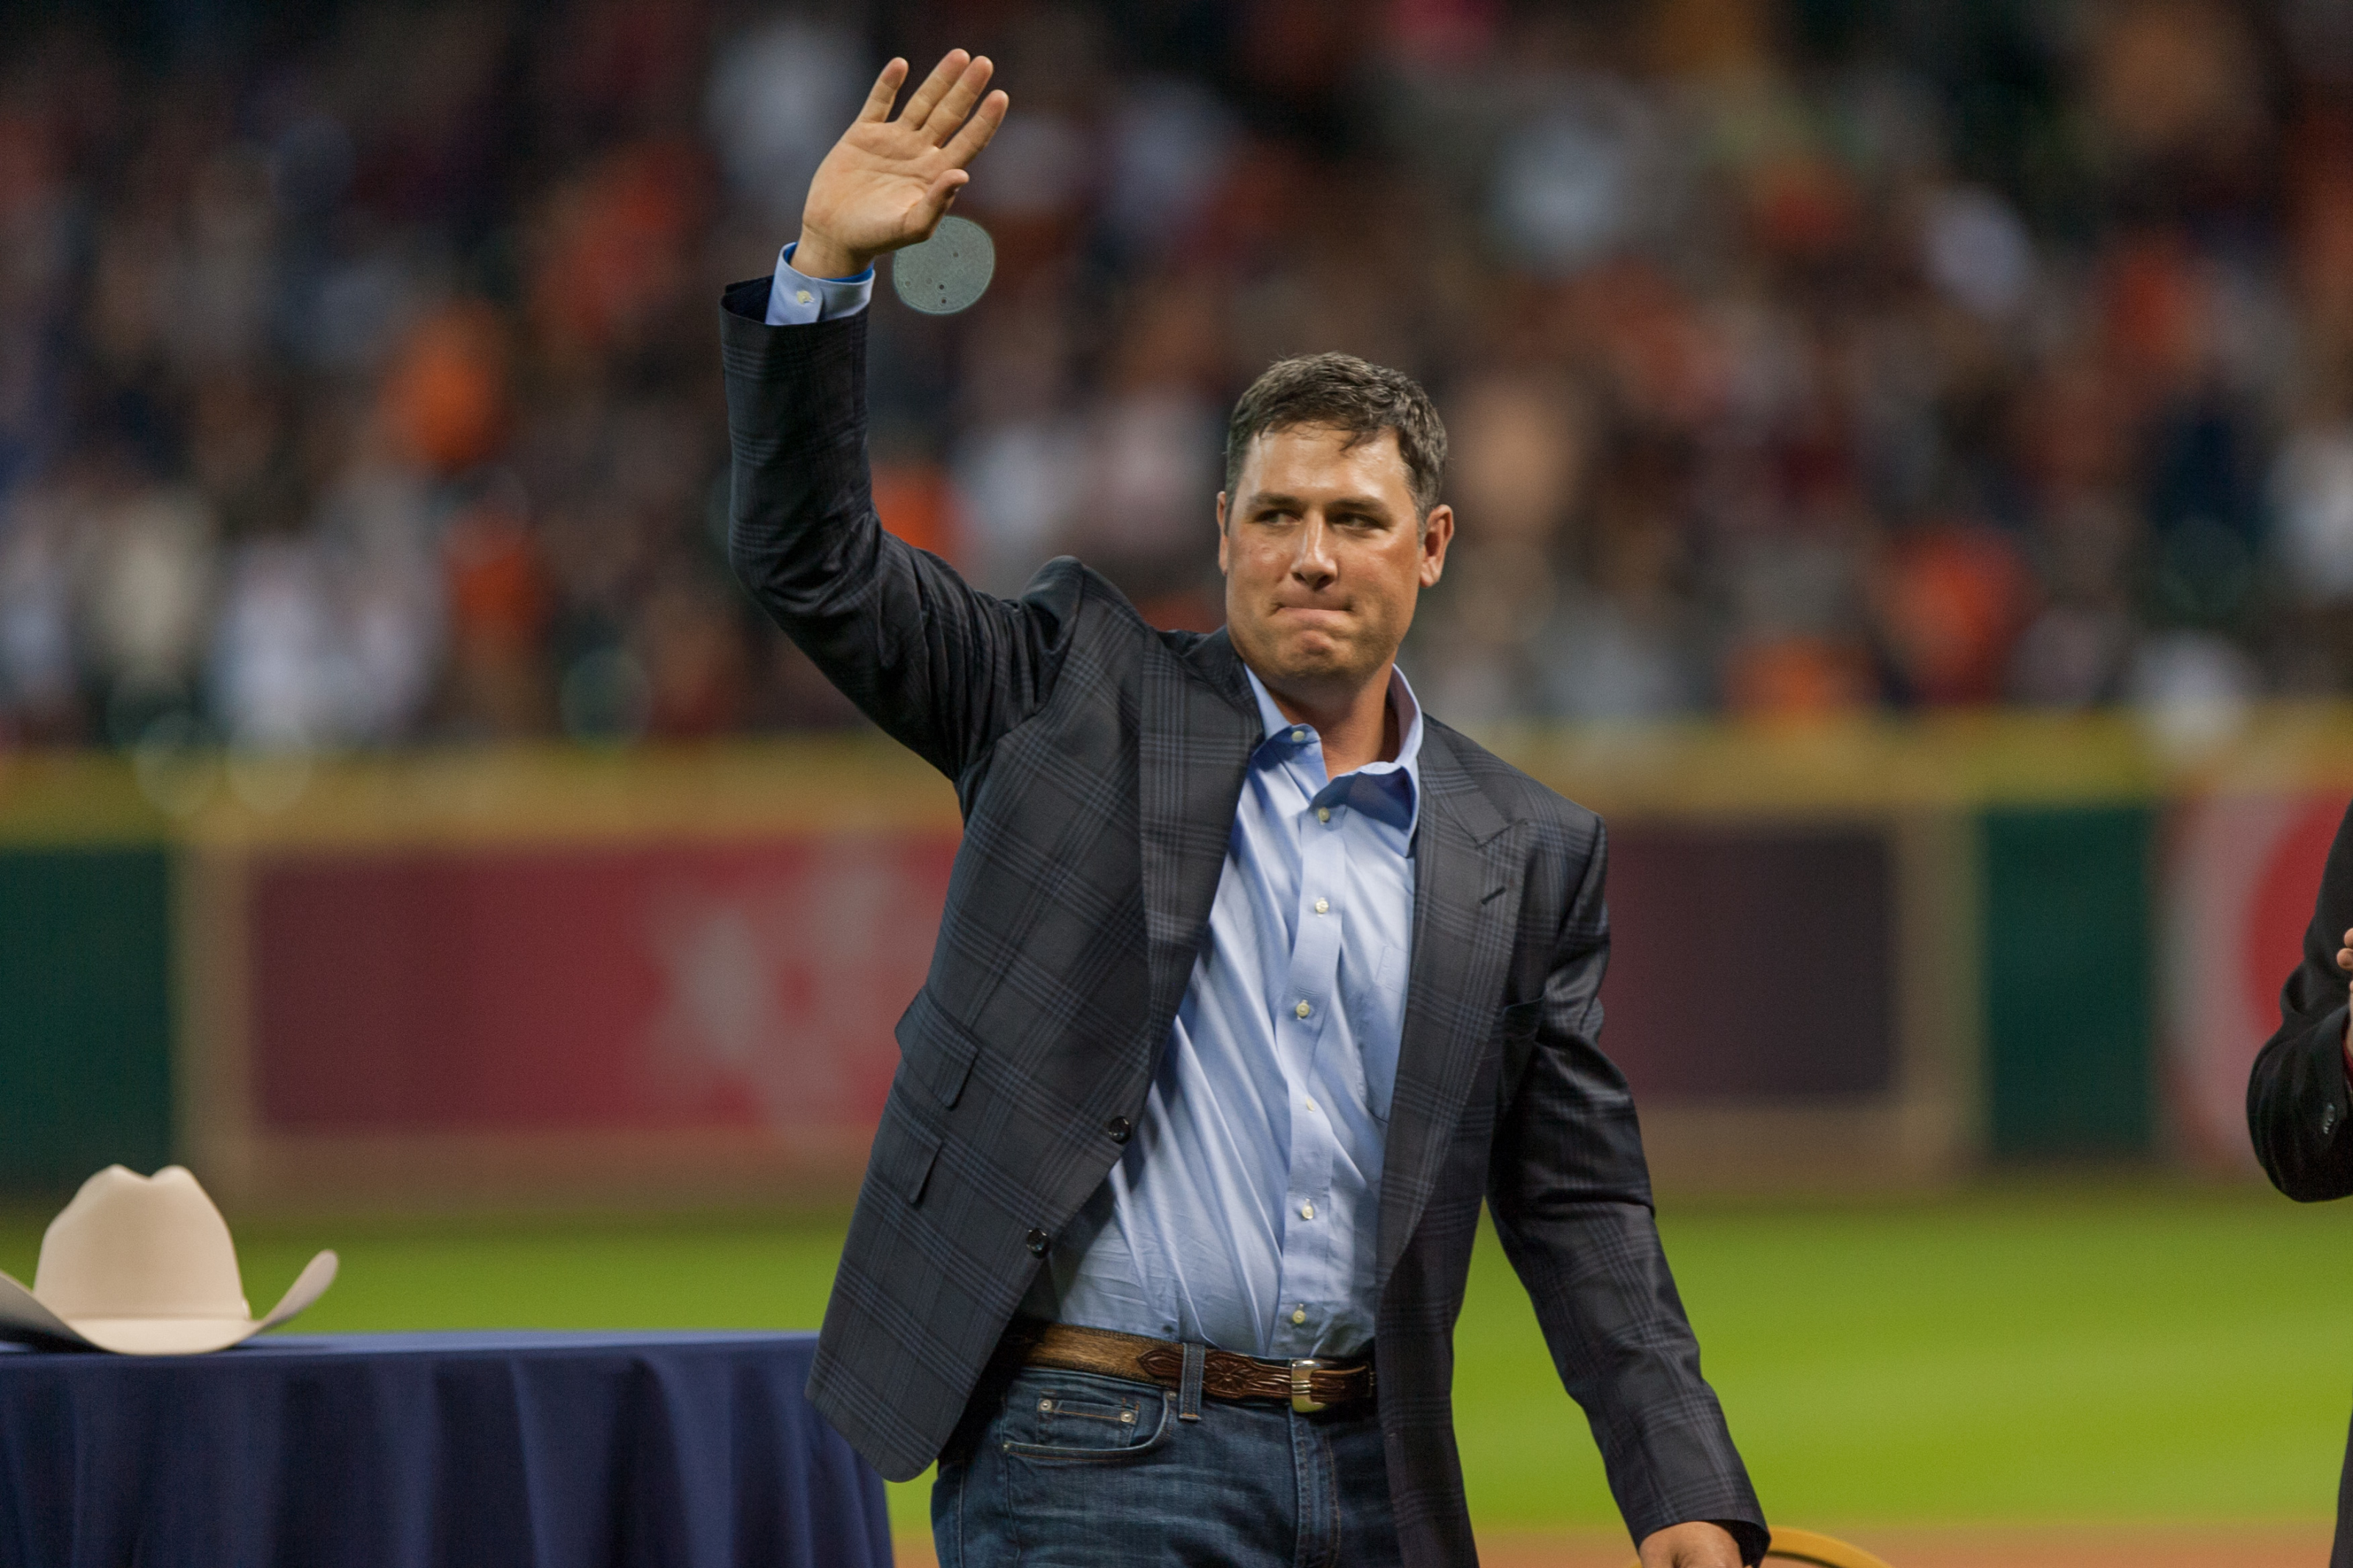 Hezzy] Is Lance Berkman the biggest one-and-done Hall of Fame